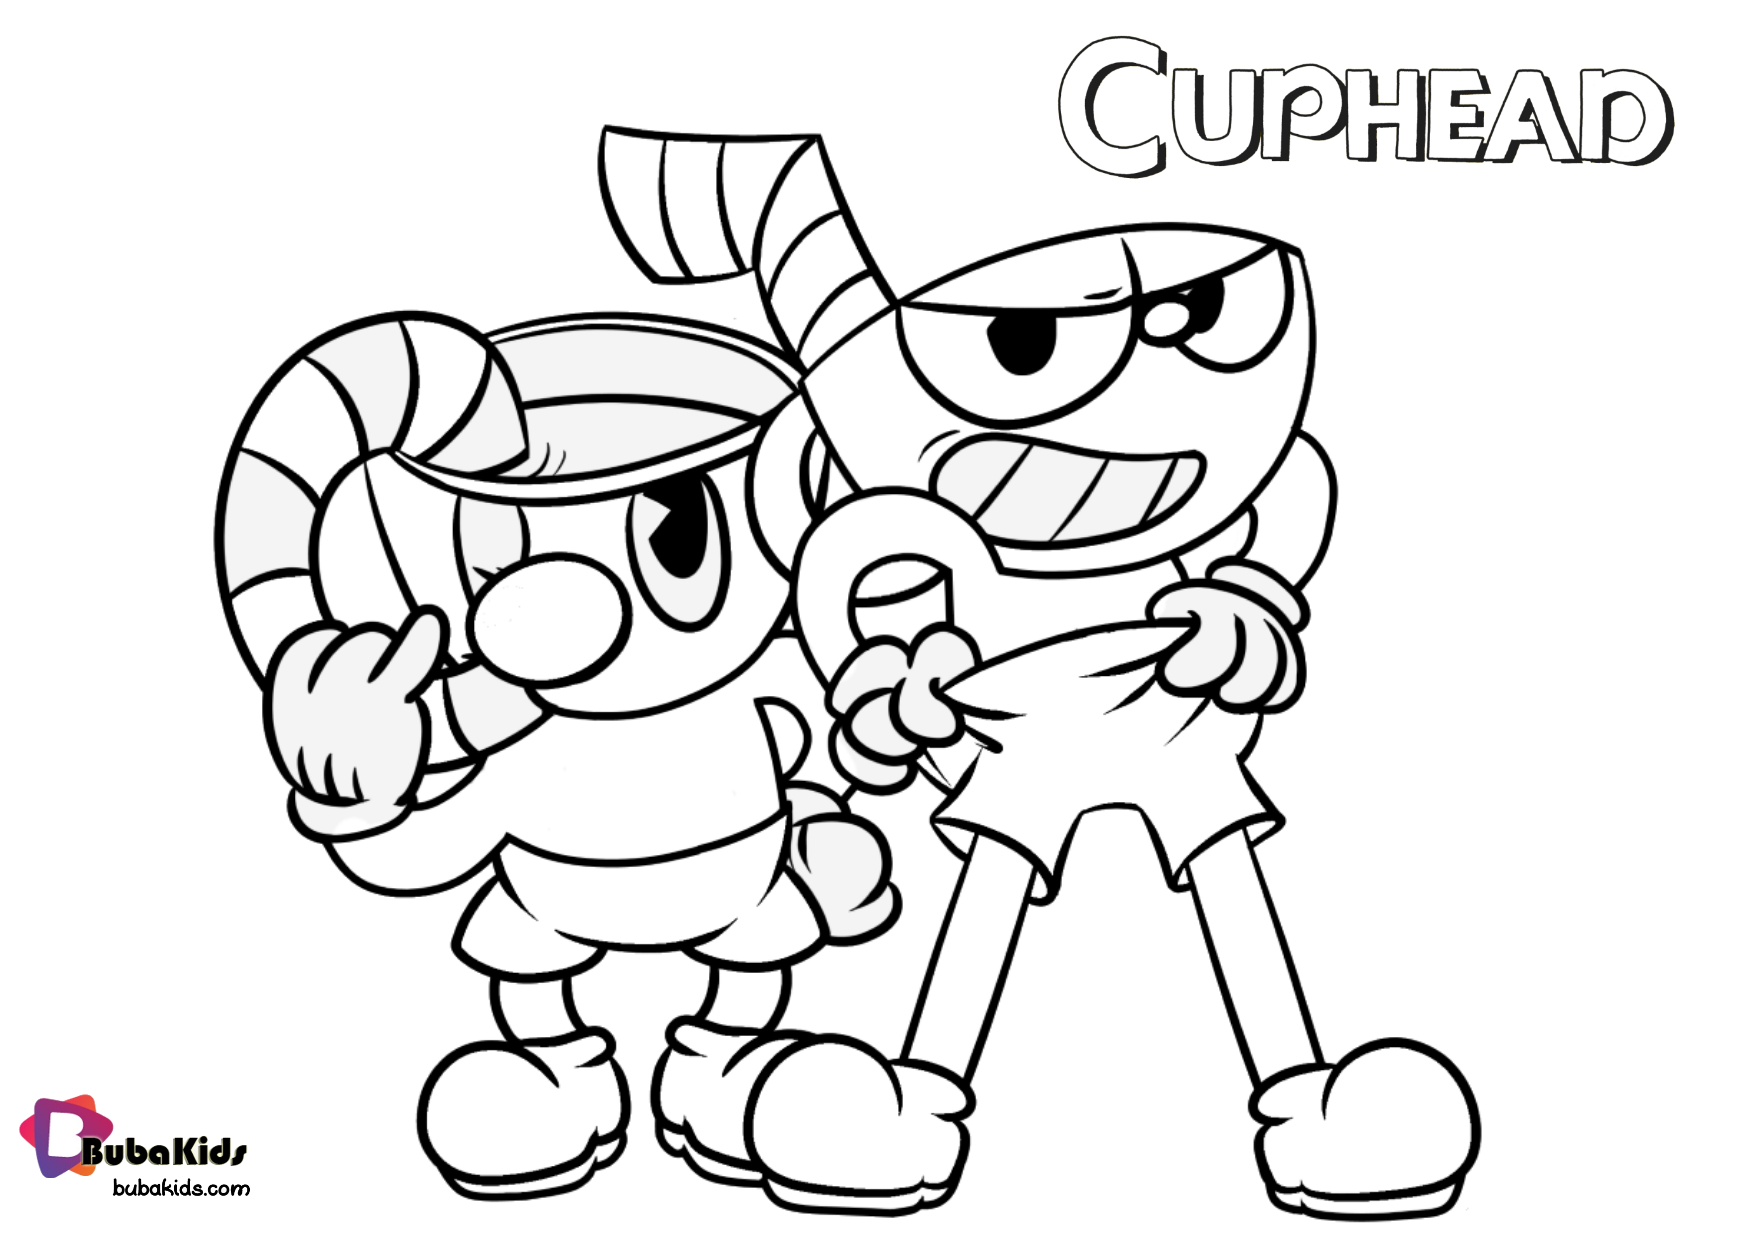 Animated characters Cuphead coloring page Wallpaper